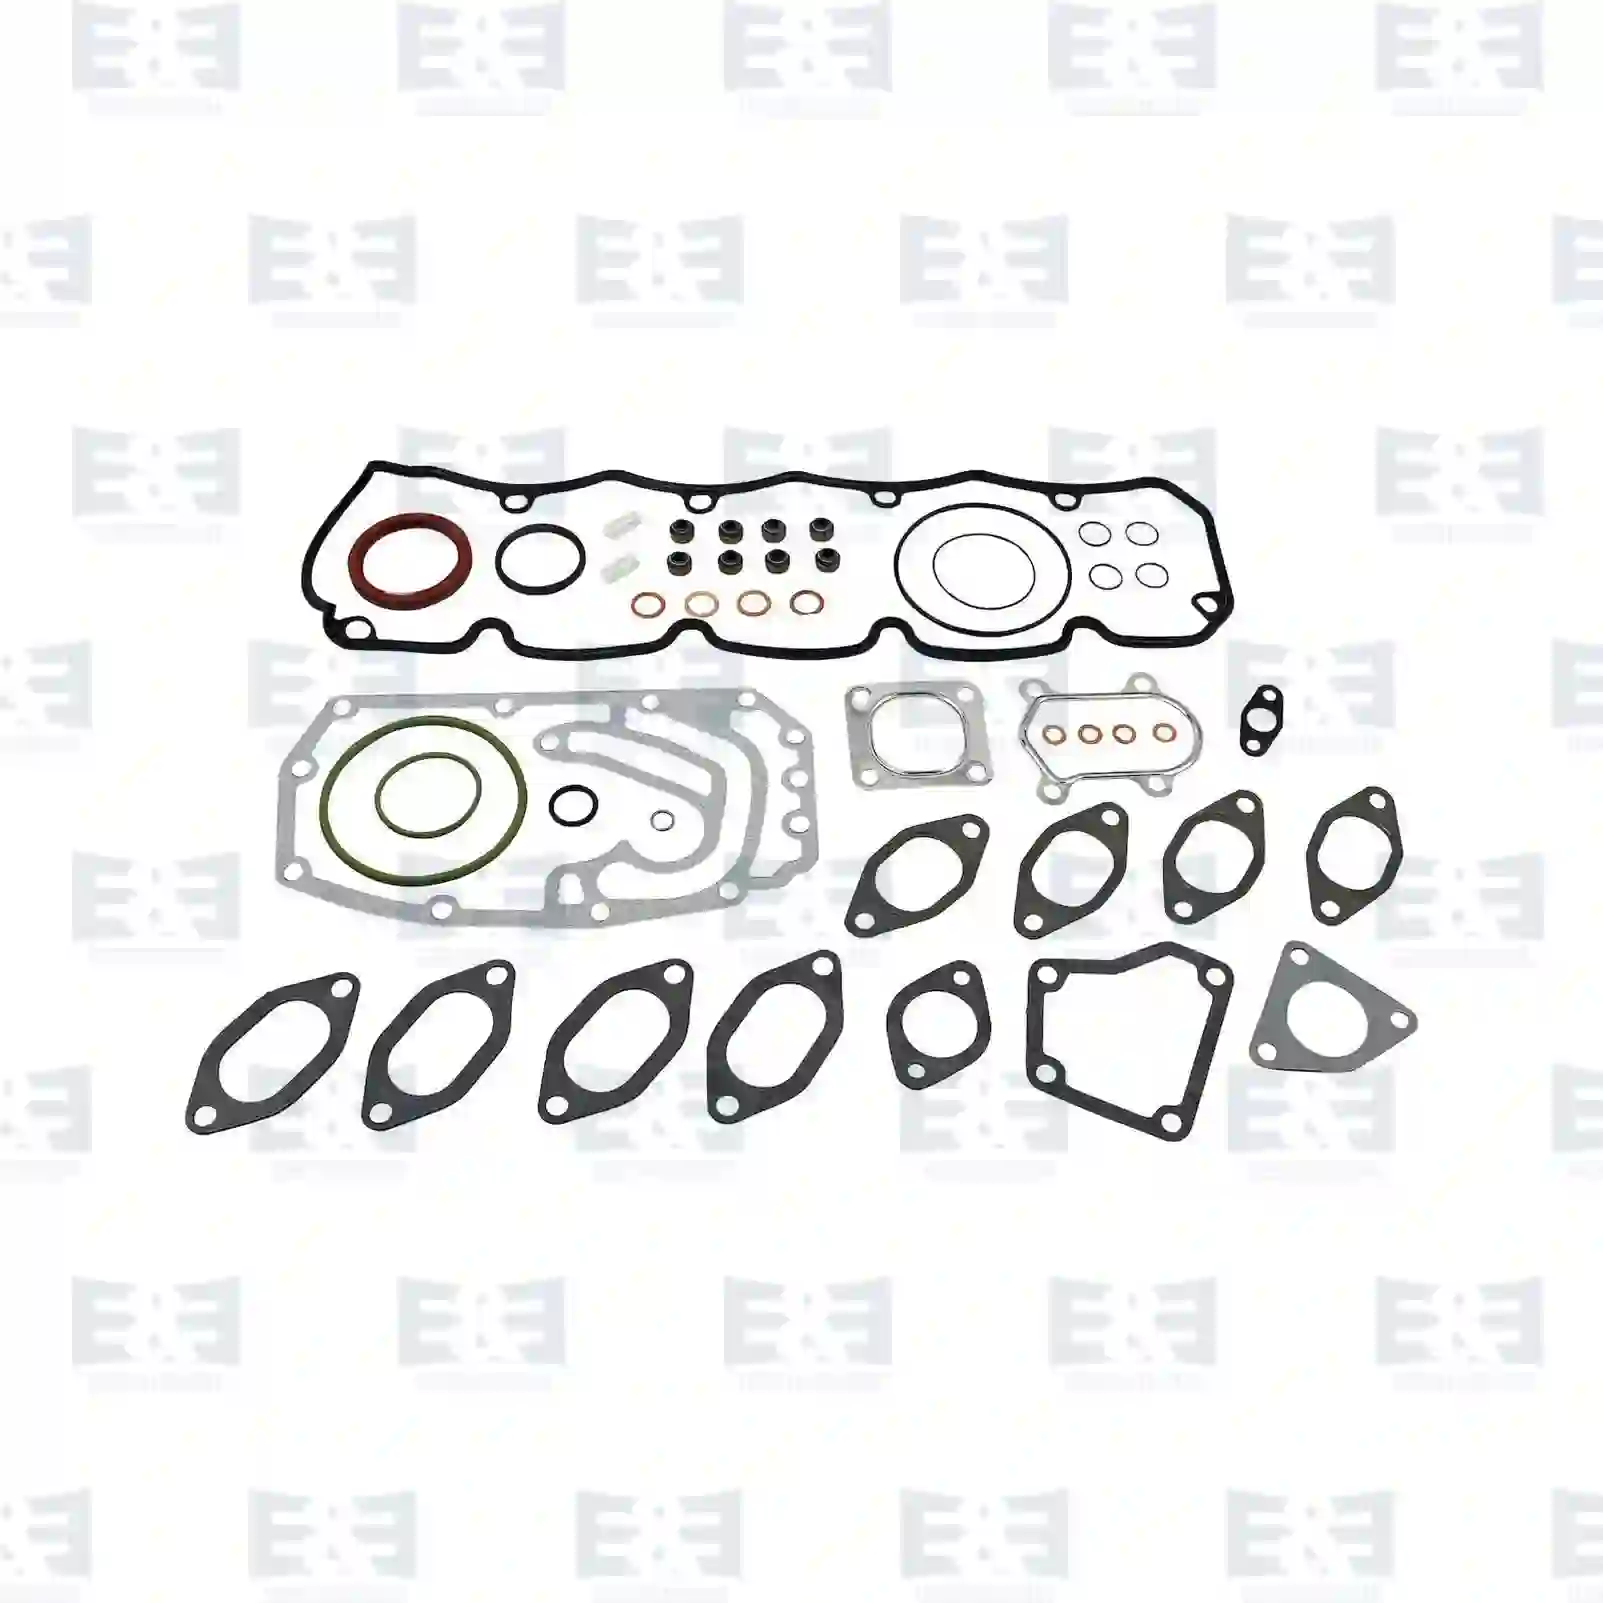 Cylinder head gasket kit, without cylinder head gasket, 2E2206988, 0197Y3, 500366528, 71713695, 9162591, 500366528, 99477119, 99477120, 4502790, 0197Y3, 7701206362 ||  2E2206988 E&E Truck Spare Parts | Truck Spare Parts, Auotomotive Spare Parts Cylinder head gasket kit, without cylinder head gasket, 2E2206988, 0197Y3, 500366528, 71713695, 9162591, 500366528, 99477119, 99477120, 4502790, 0197Y3, 7701206362 ||  2E2206988 E&E Truck Spare Parts | Truck Spare Parts, Auotomotive Spare Parts